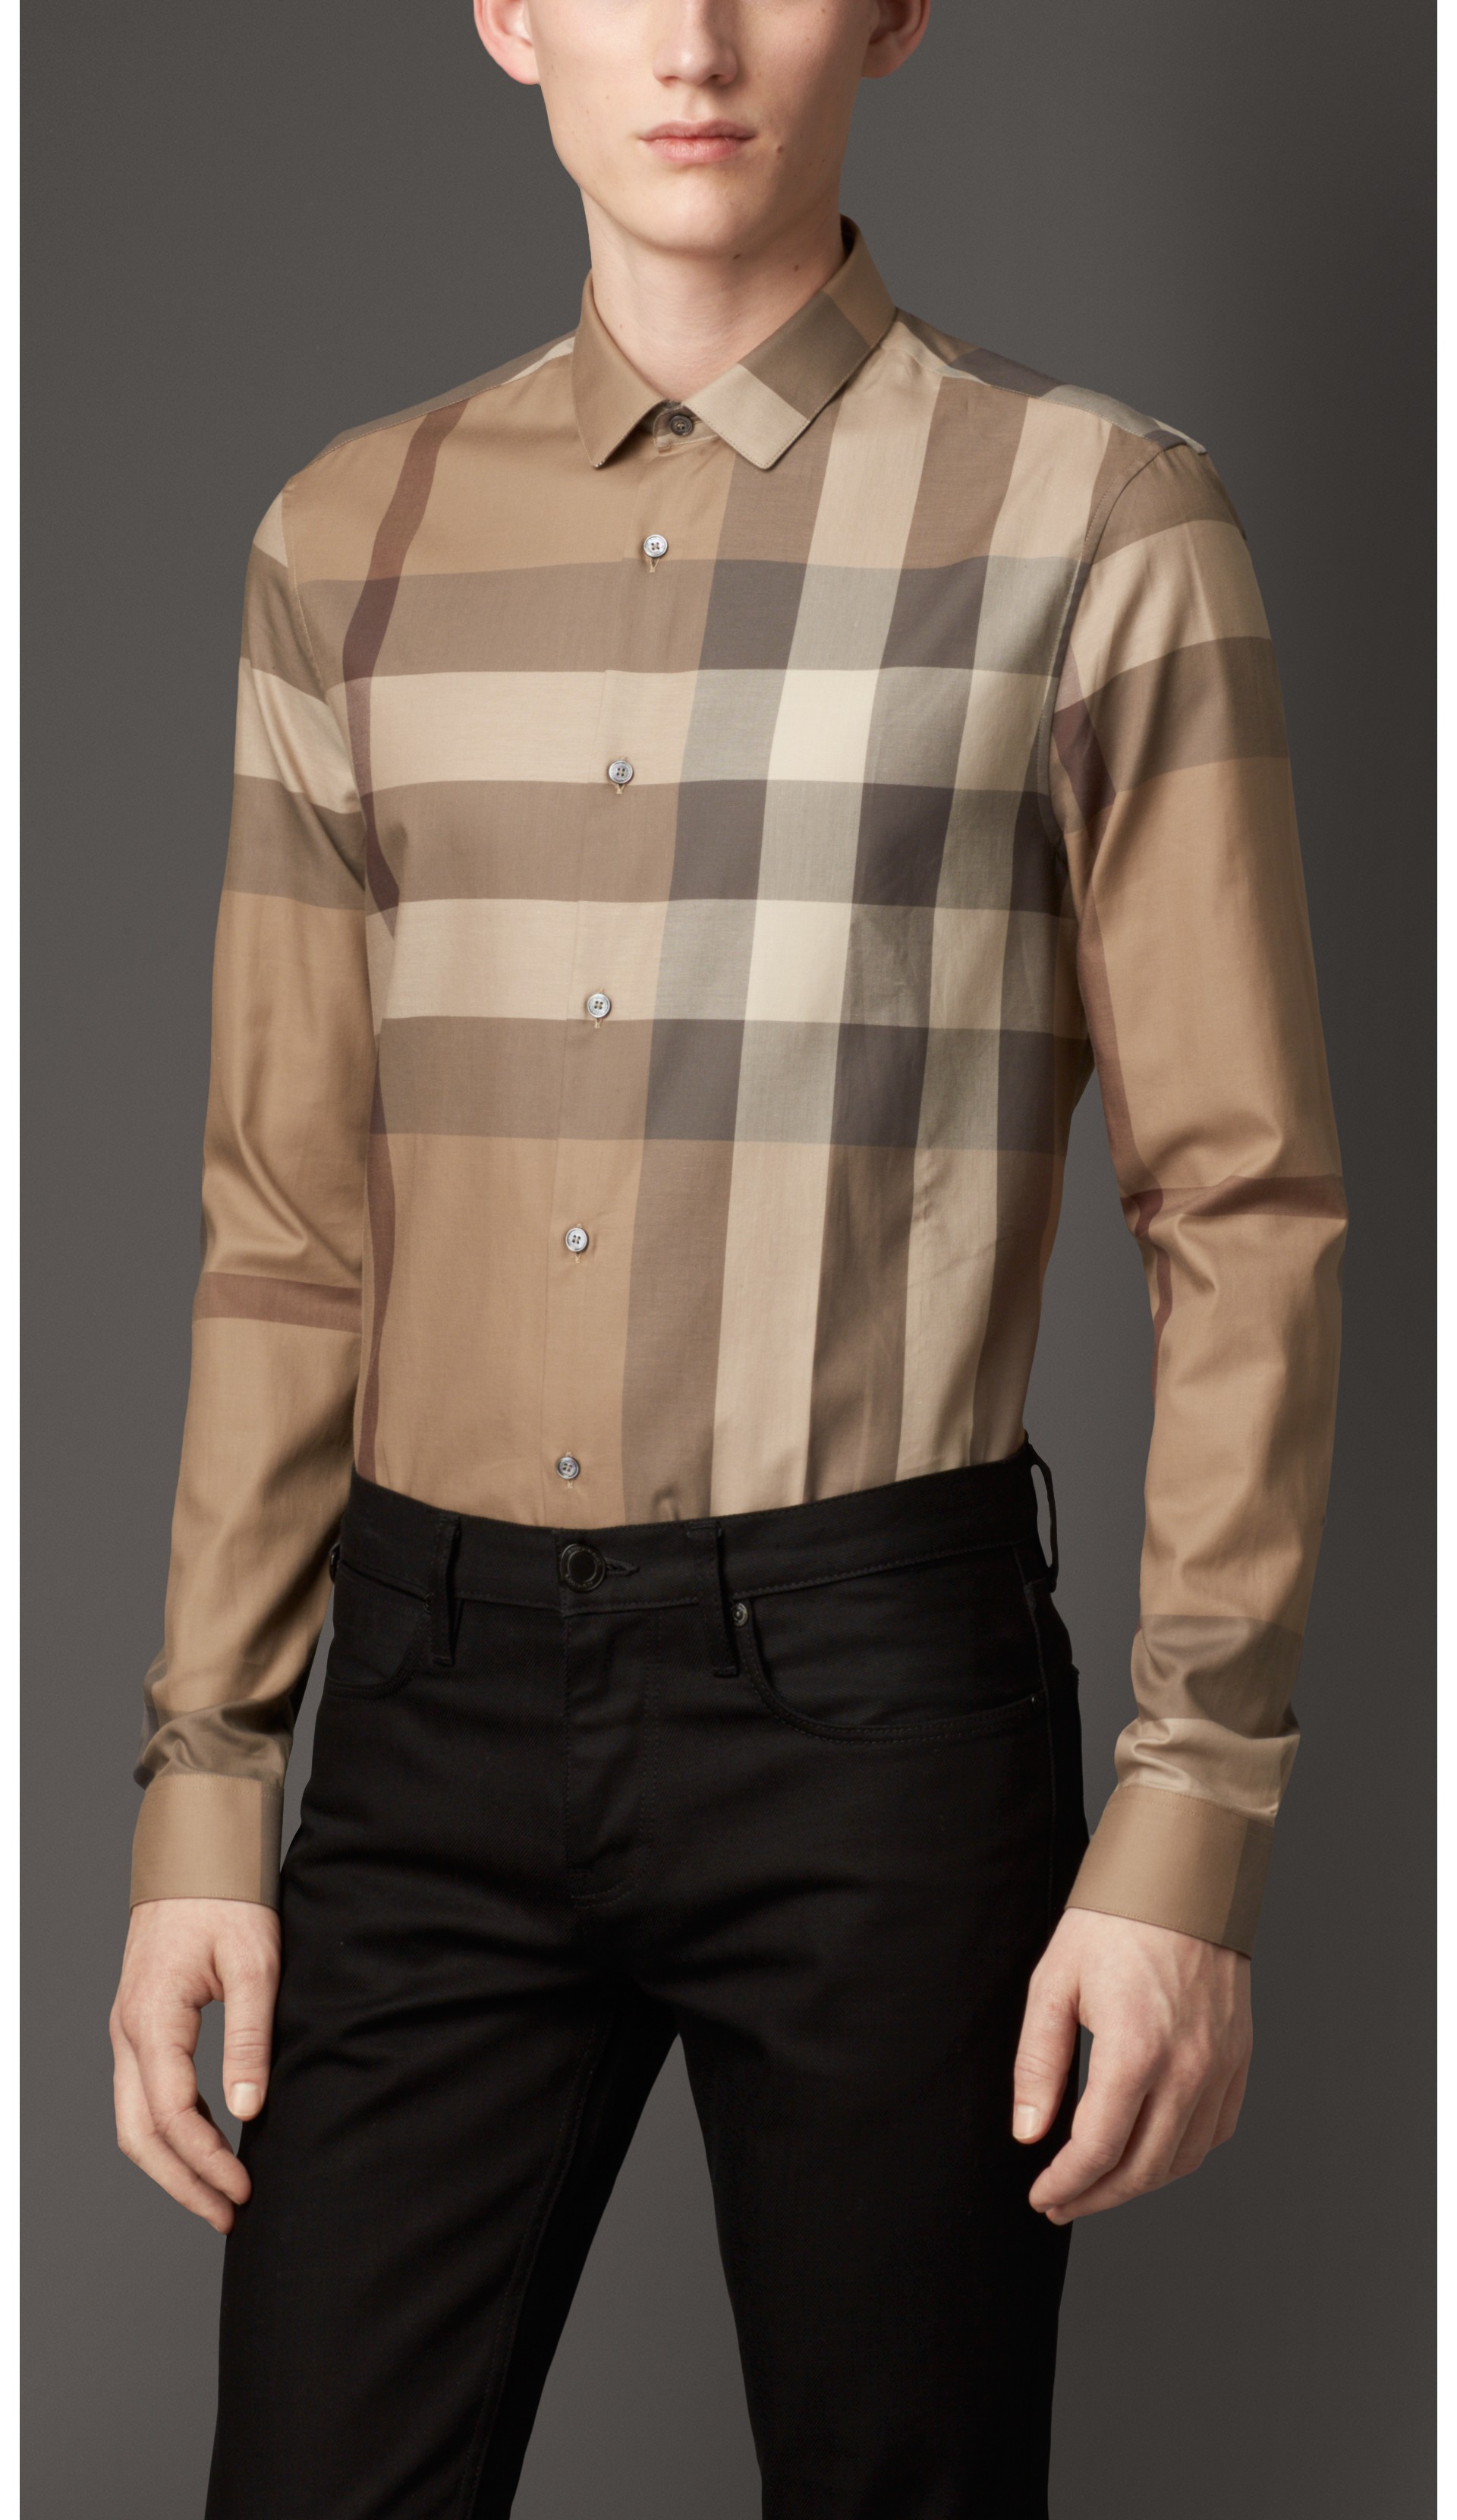 Slim Fit Check Cotton Shirt in Smoked Trench - Men | Burberry United States